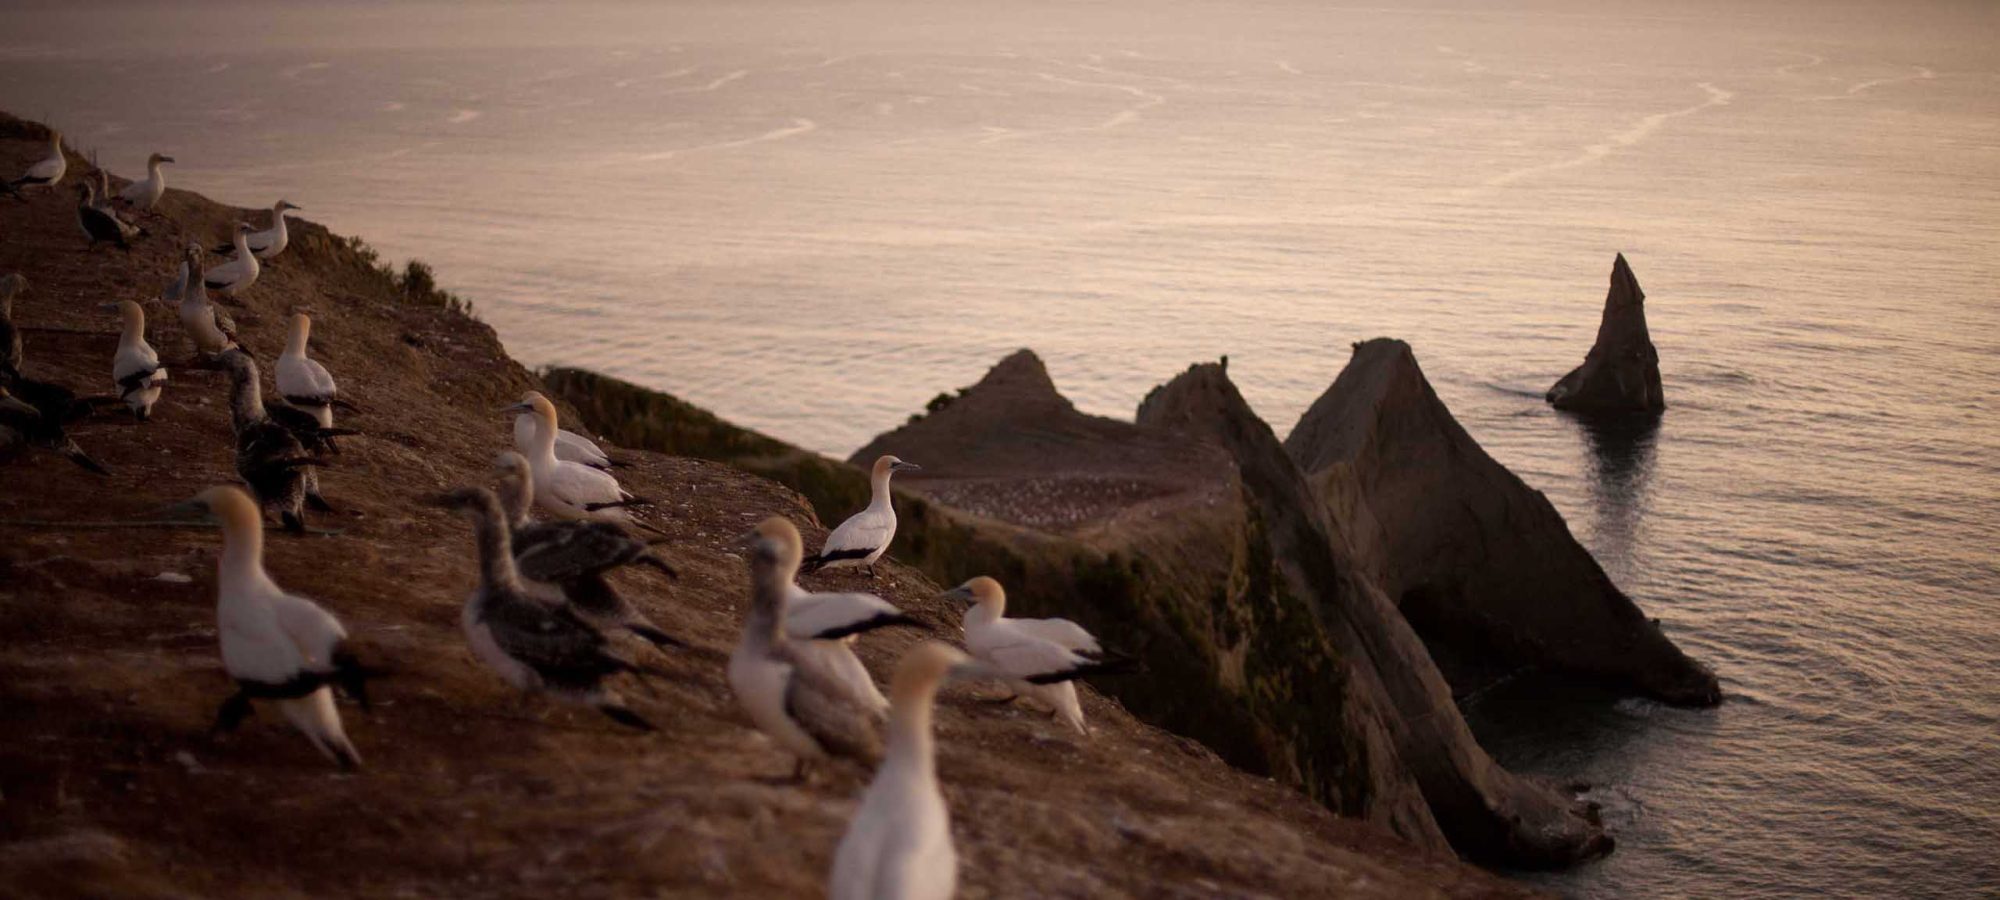 Region-Hawkes-Bay-Napier-Gannet-Colony-Cape-Kidnappers-Wildlife-Sunset-HBT-Photo-Credit-Banner